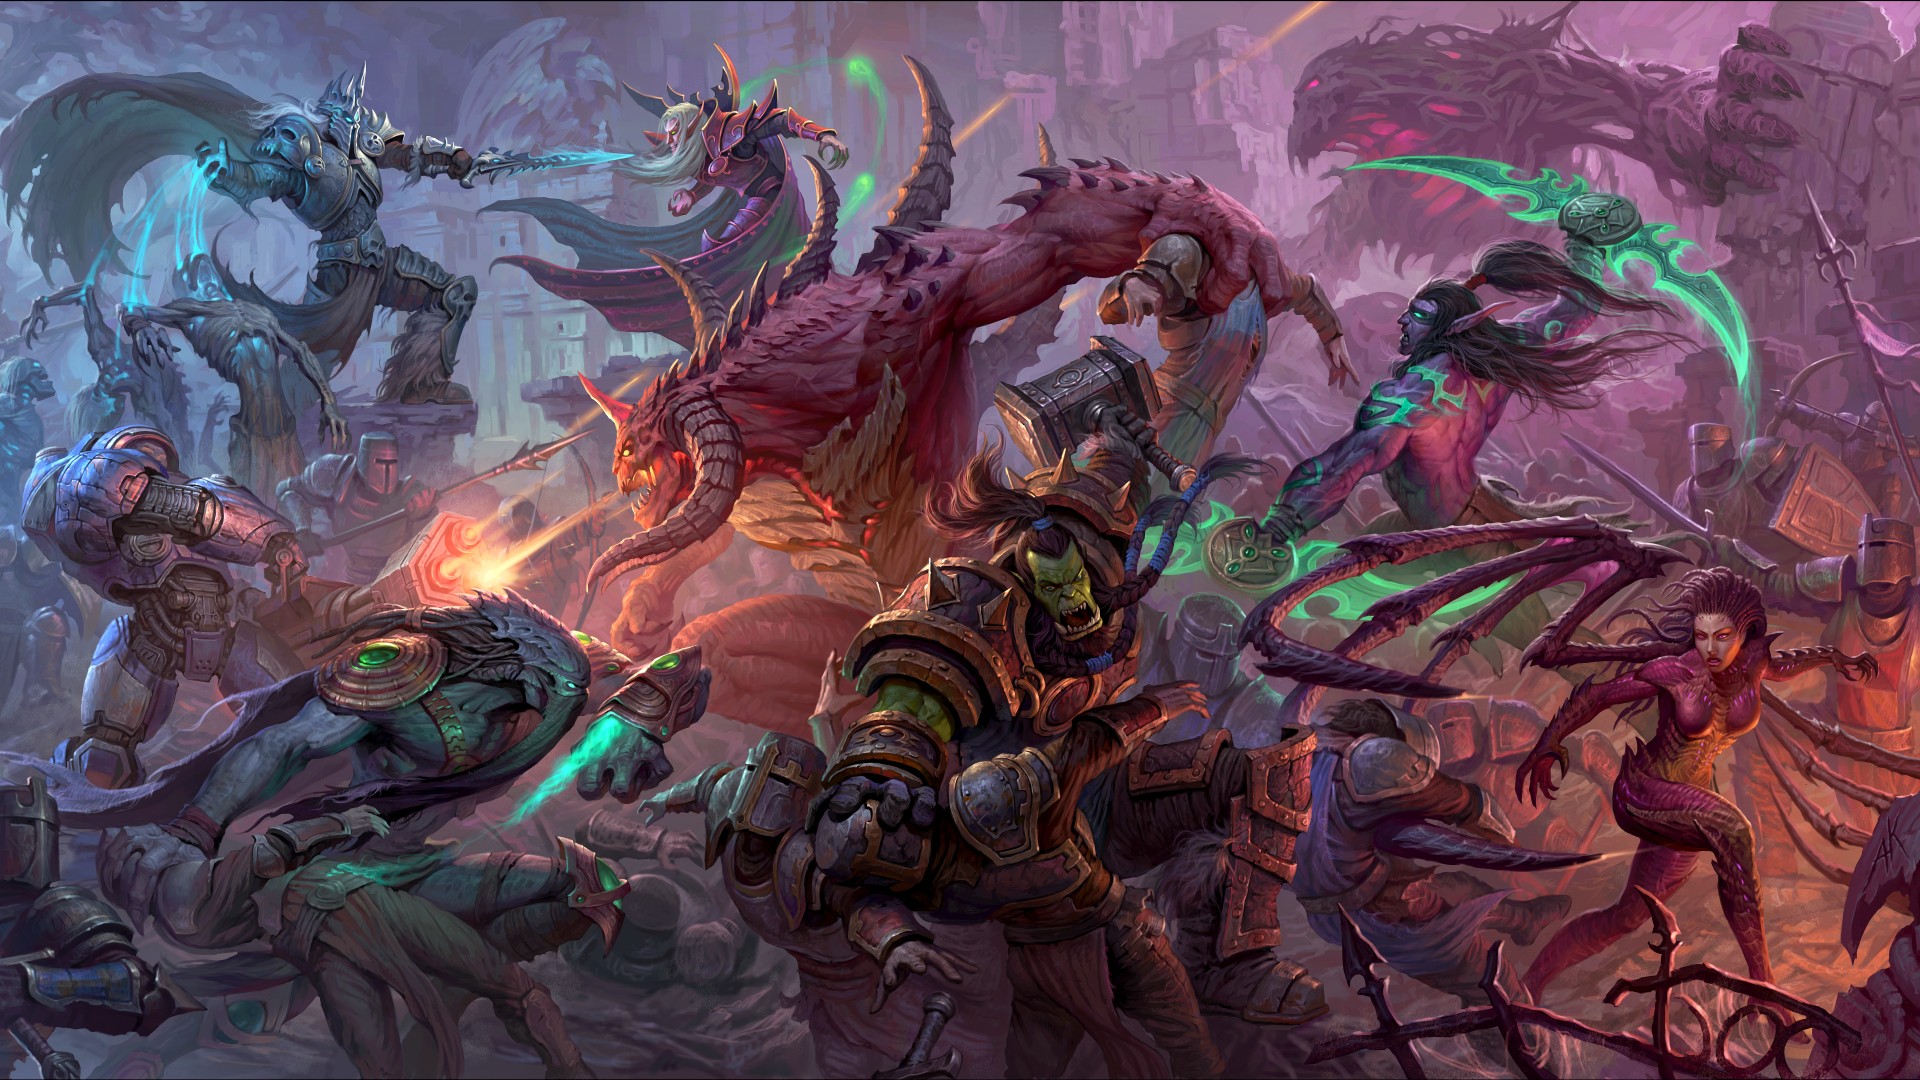 heroes of the storm wallpaper 1920x1080,action adventure game,cg artwork,fictional character,pc game,demon